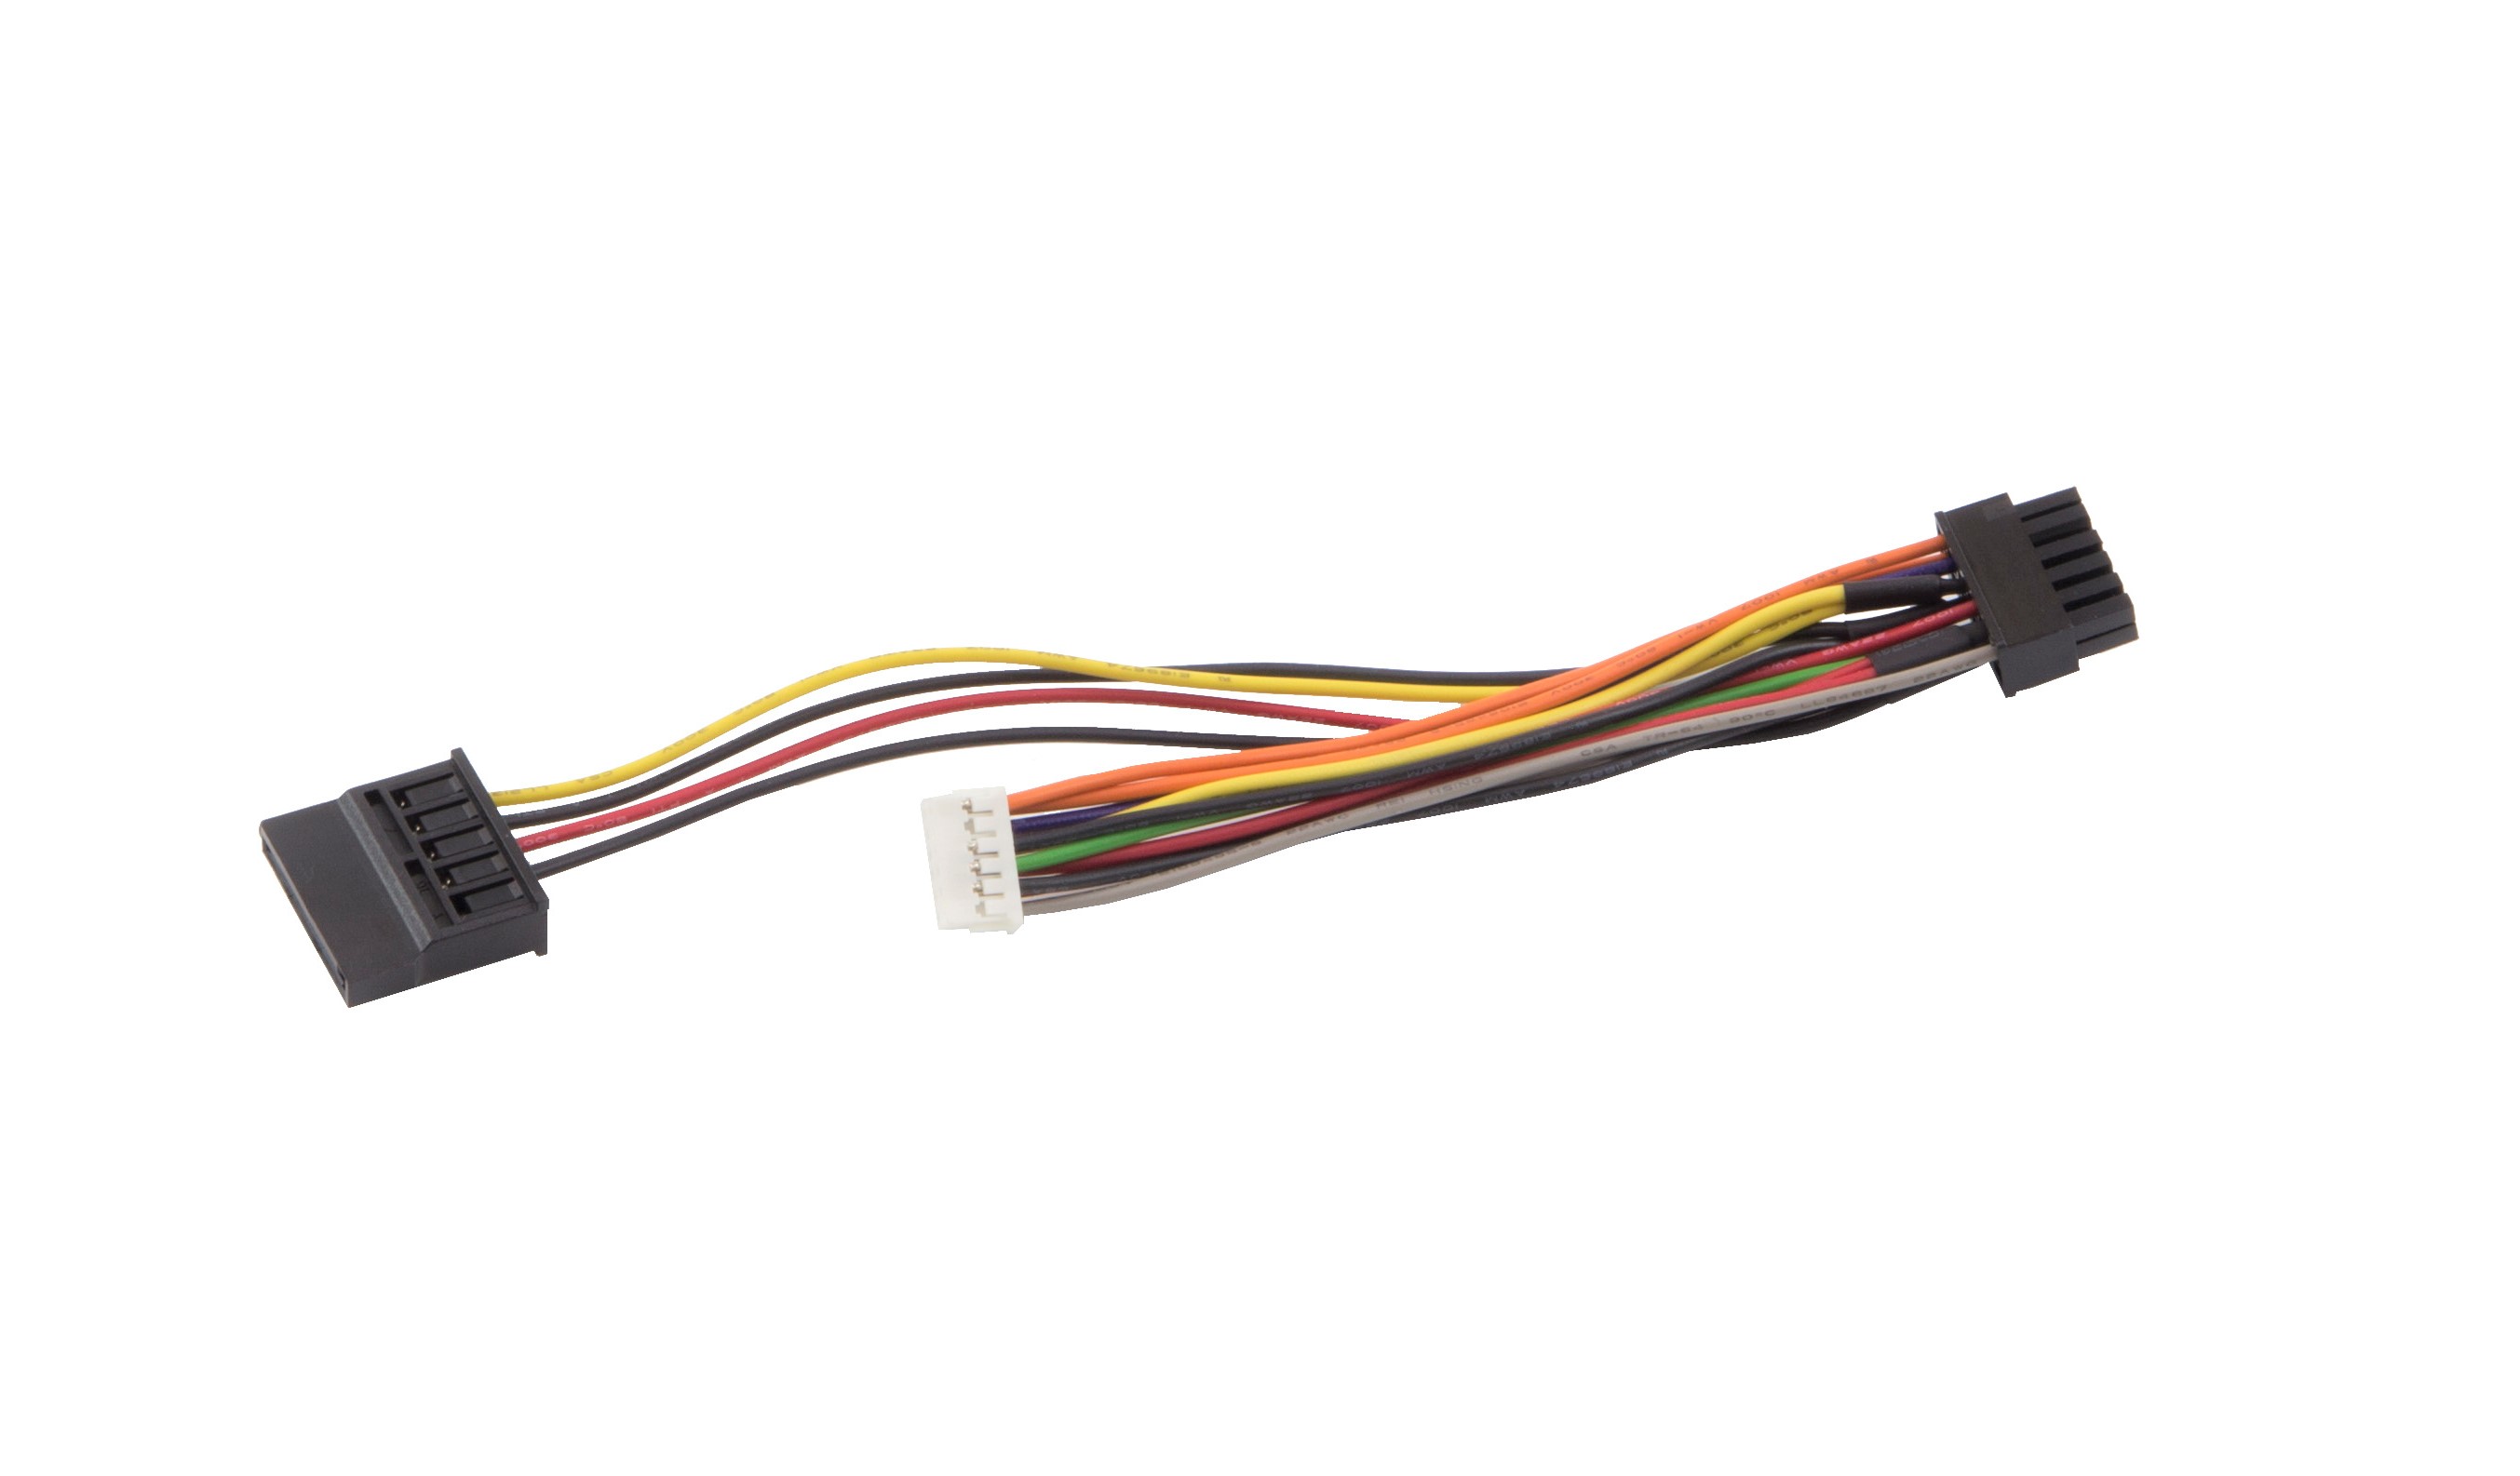 PITCH 2.0 TO PITCH 3.0 POWER CABLE+SATA CABLE  |Products|Accessories|Cable & Cord